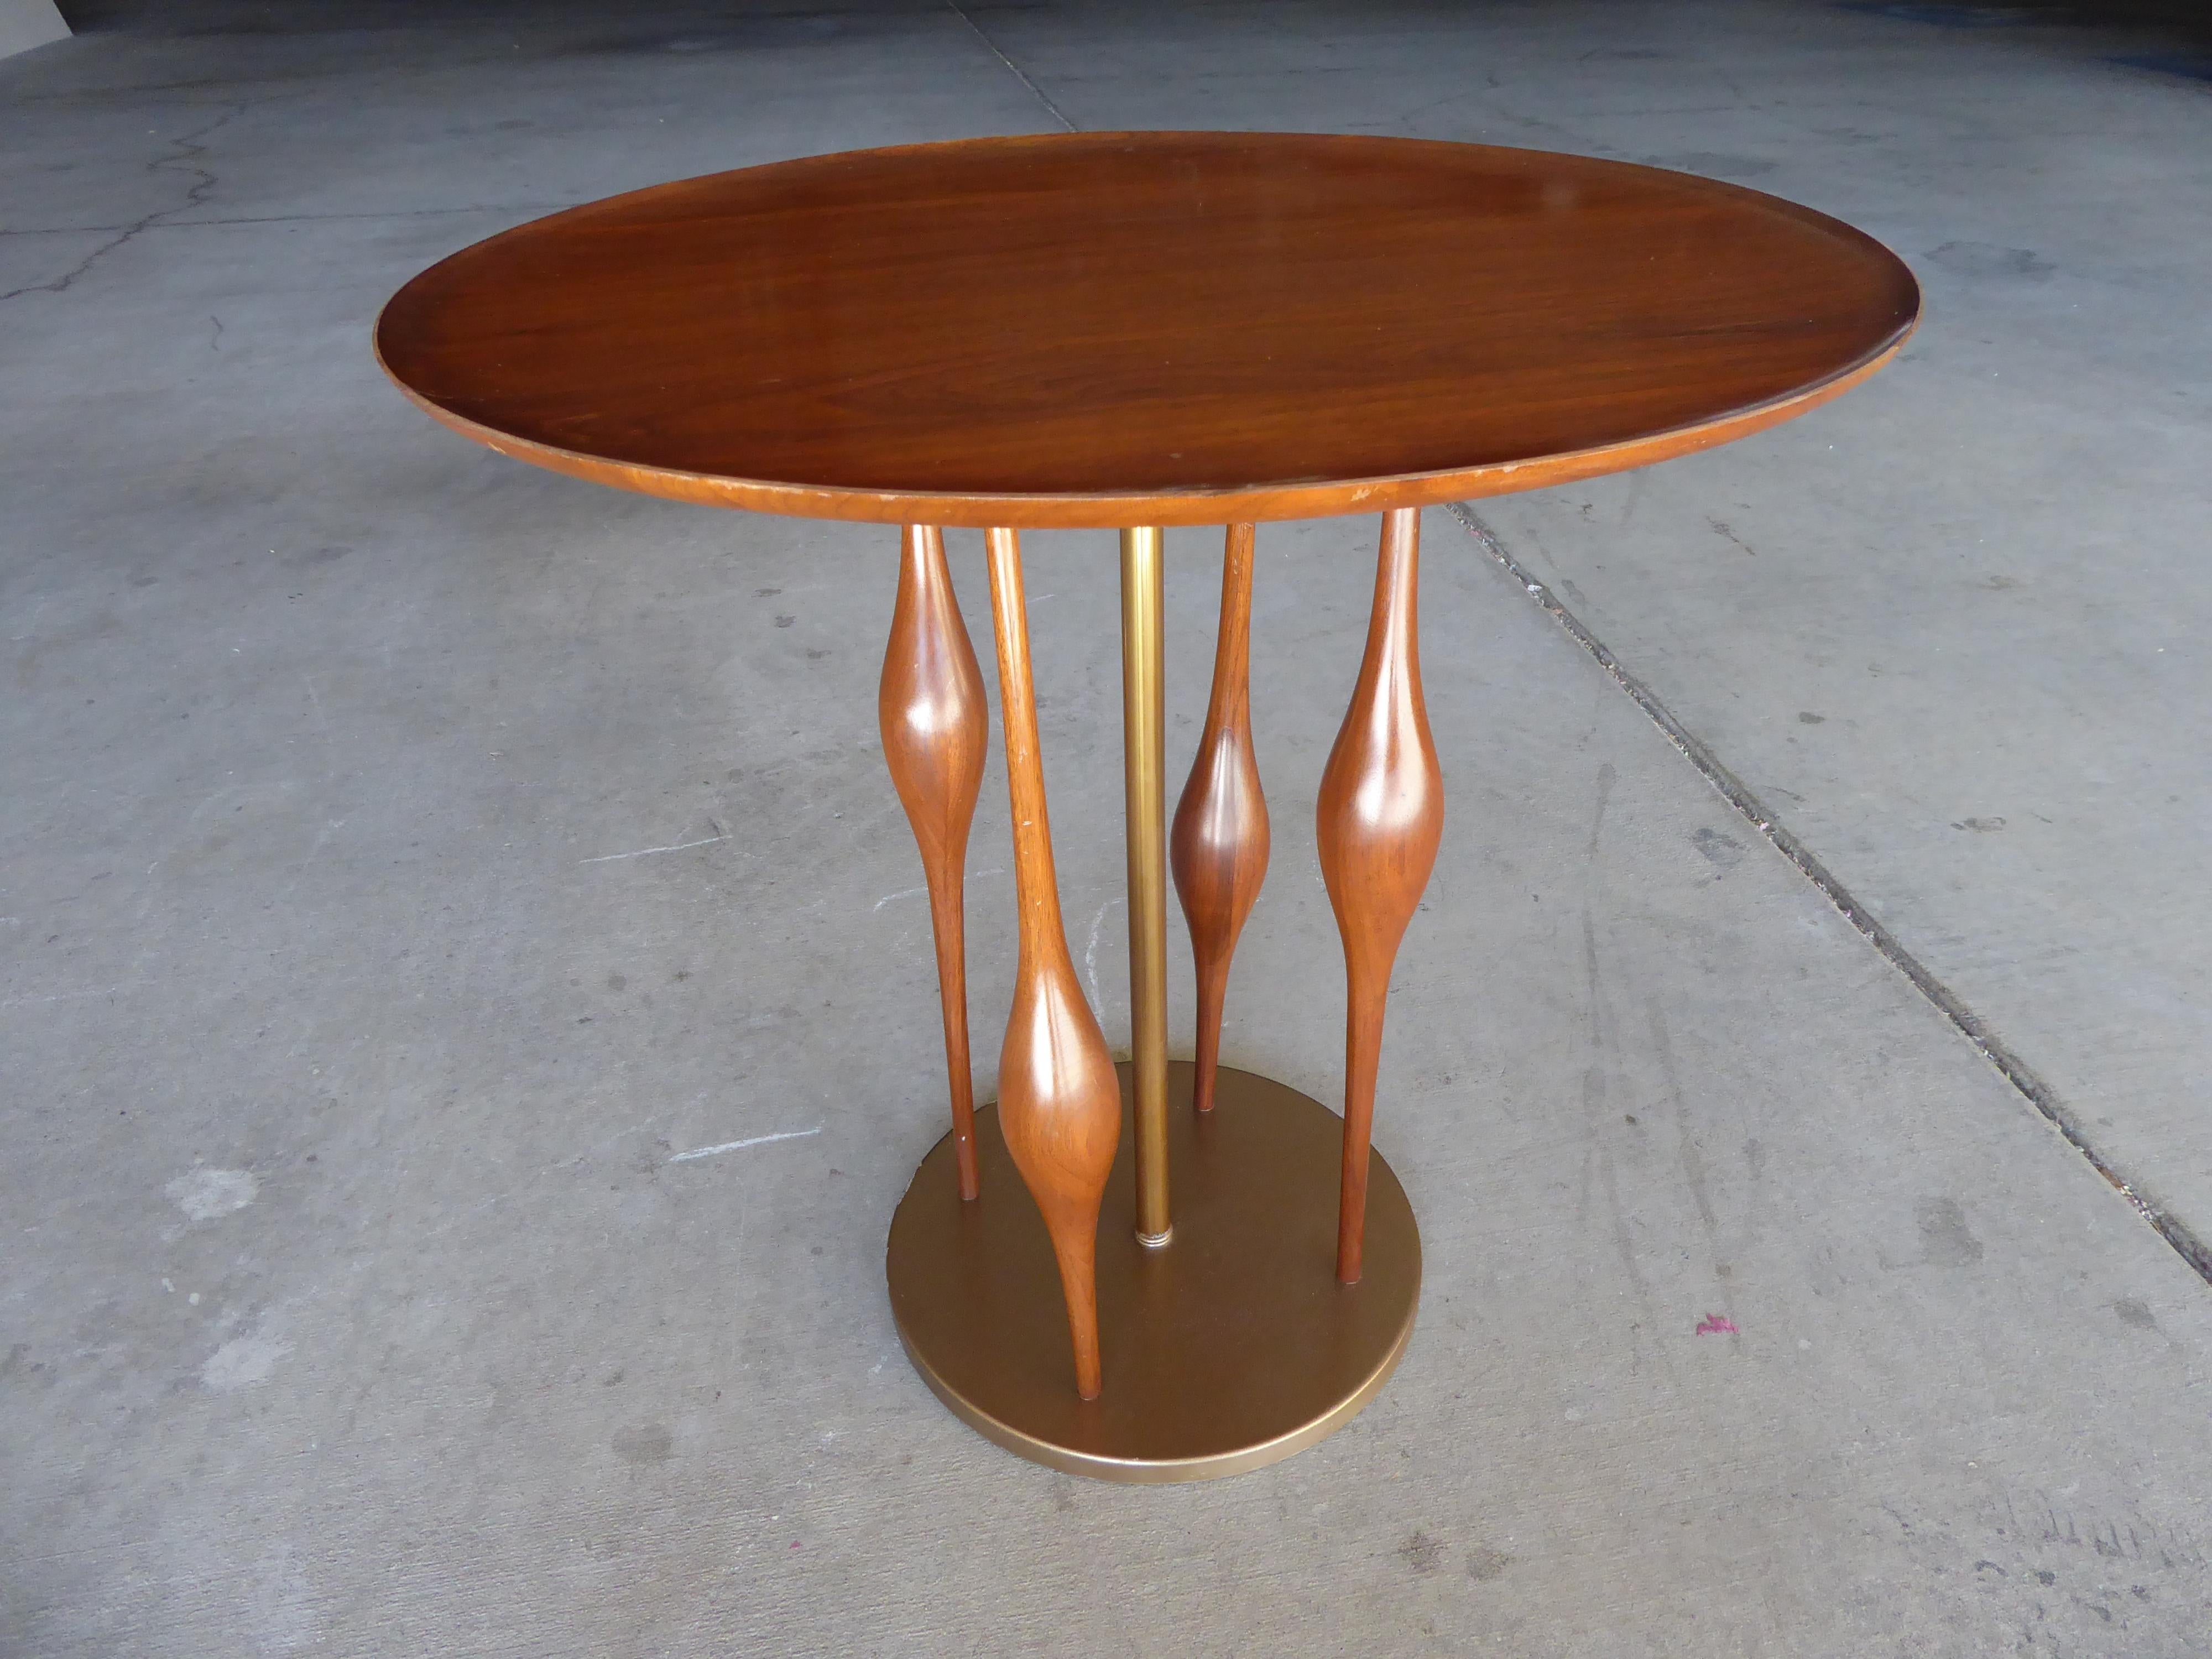 A walnut and brass side table attributed to Modeline of California, circa 1950s. This attribution is based on the visual similarities of the table's base to the details of lamps made by the Modeline Company. The base of the table has a brass